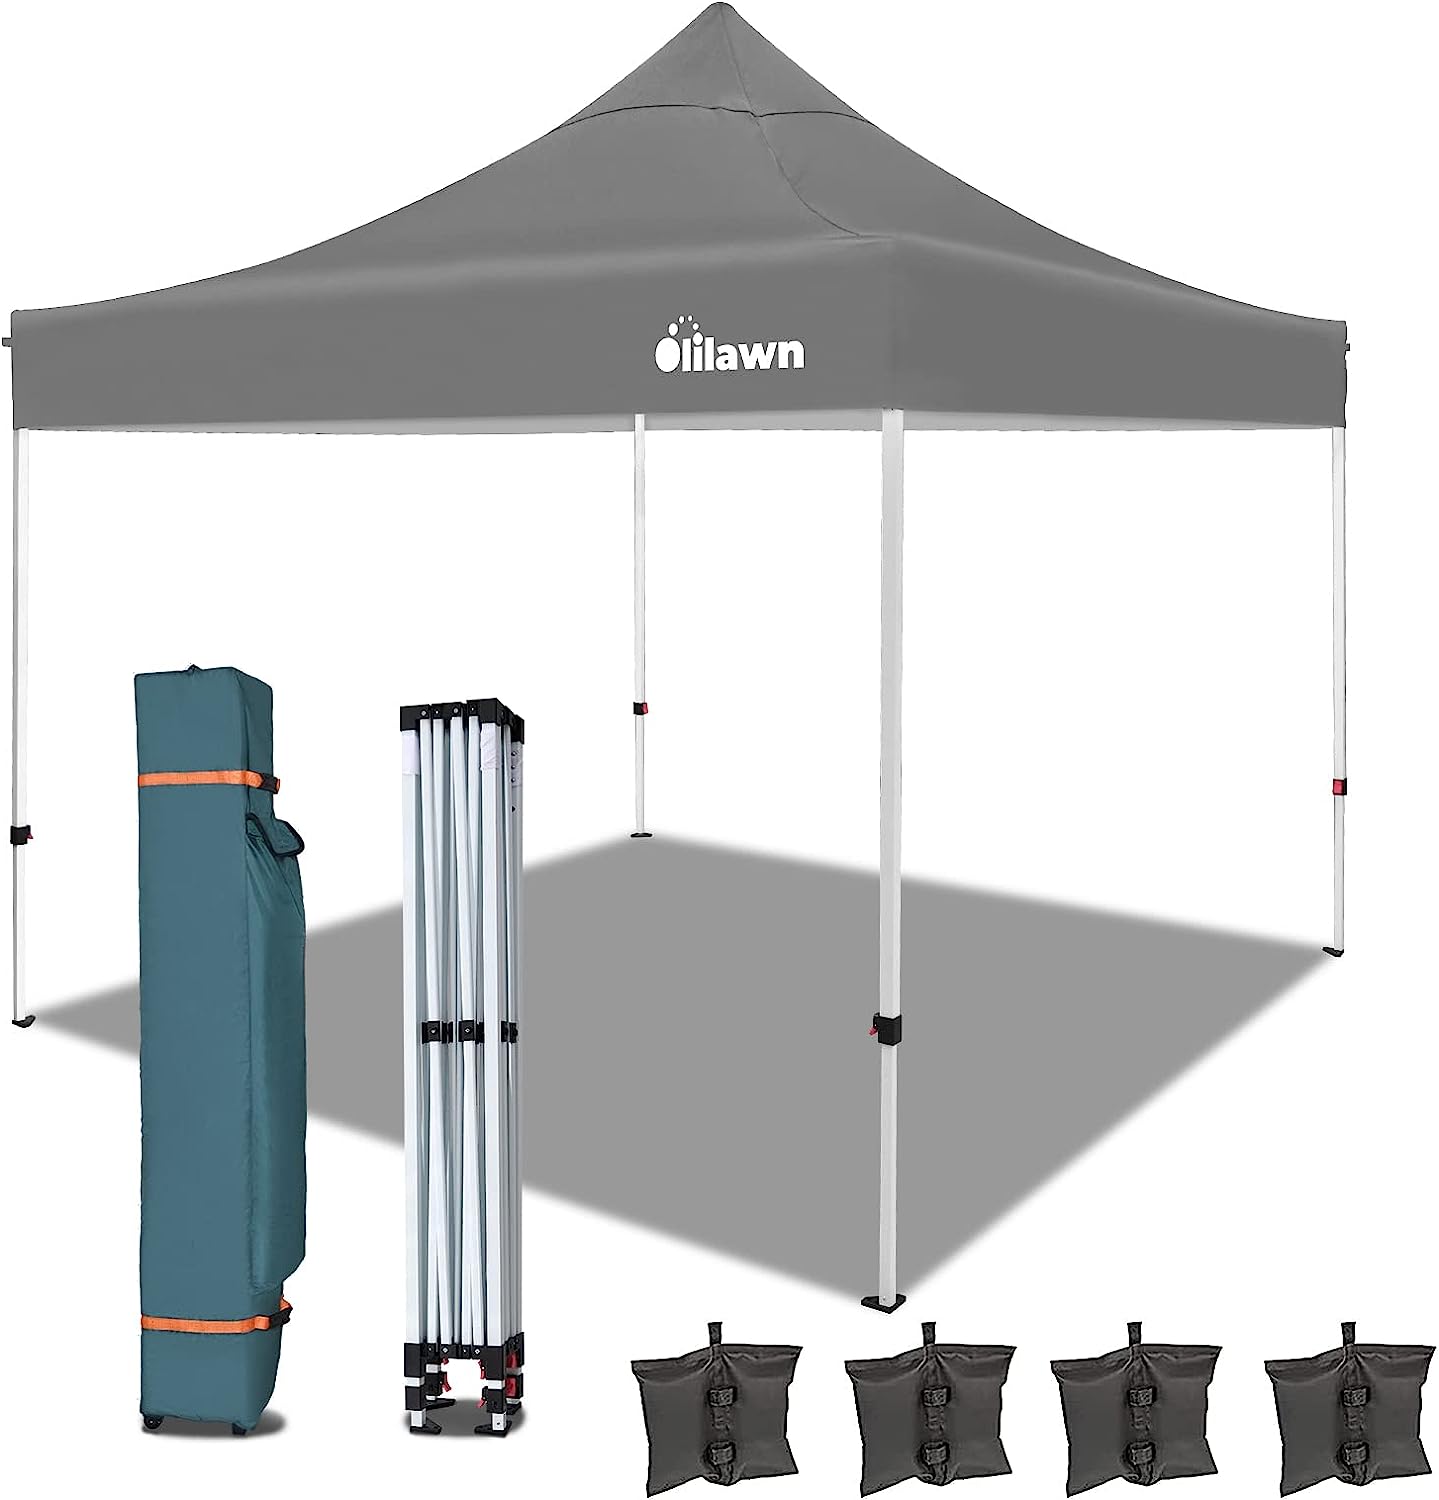 OLILAWN 10x10 Pop Up Canopy Tent Gray